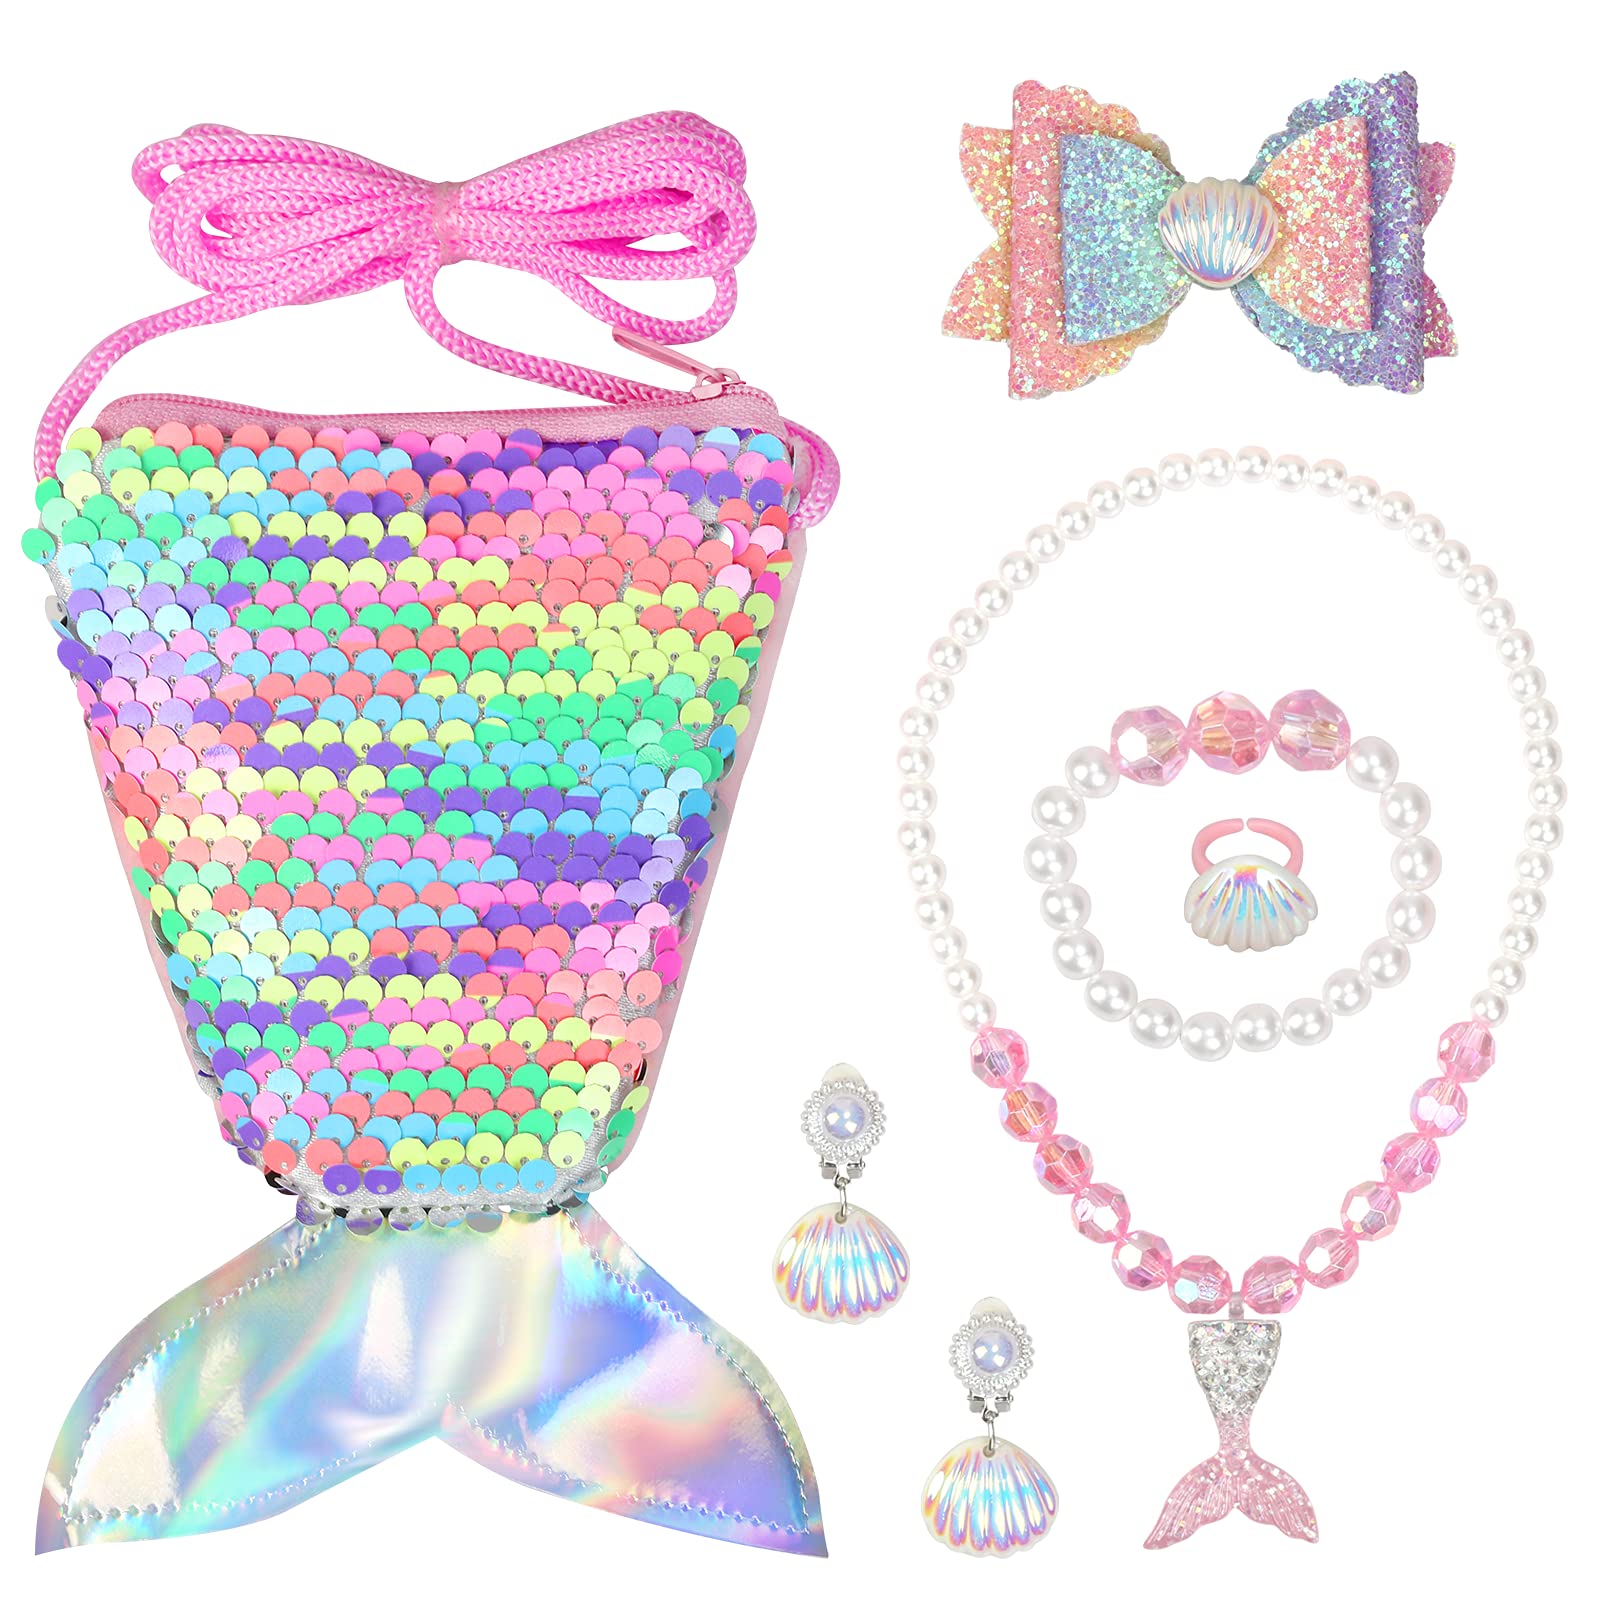 MEETANG Kids Mermaid Jewellery Set for Girls with Gift Box Easter Sequins Mermaid Tail Purse Bag Bow Knot Hair Clip Necklace Bracelet Ring Earrings for Dress Up Party Gifts for Little Girls